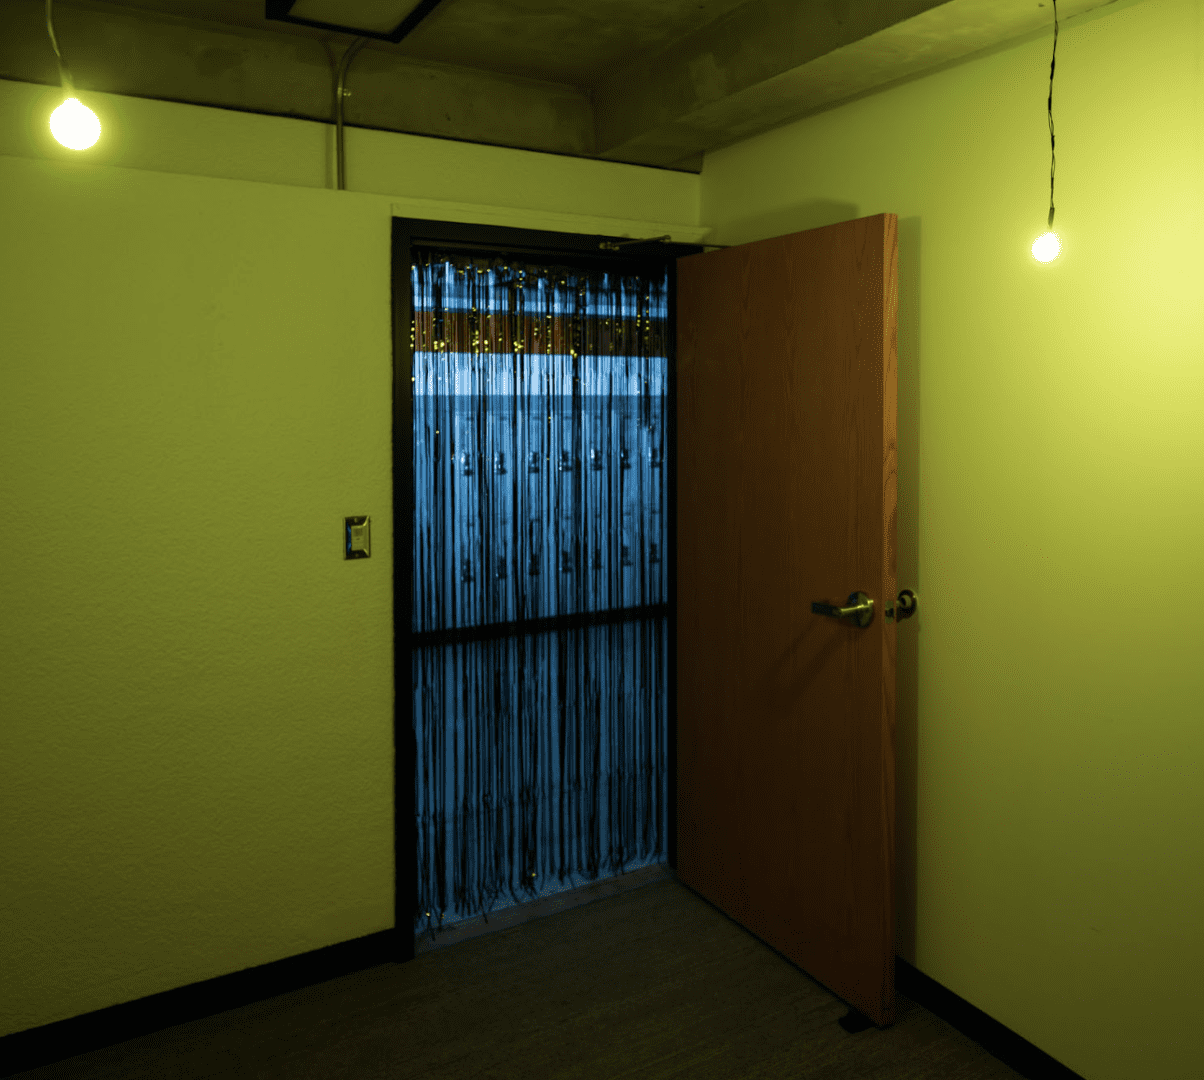 A small room bathed in yellow light. The doorway is covered in a curtain of tinsel strips. Two small lights hang low from the ceiling